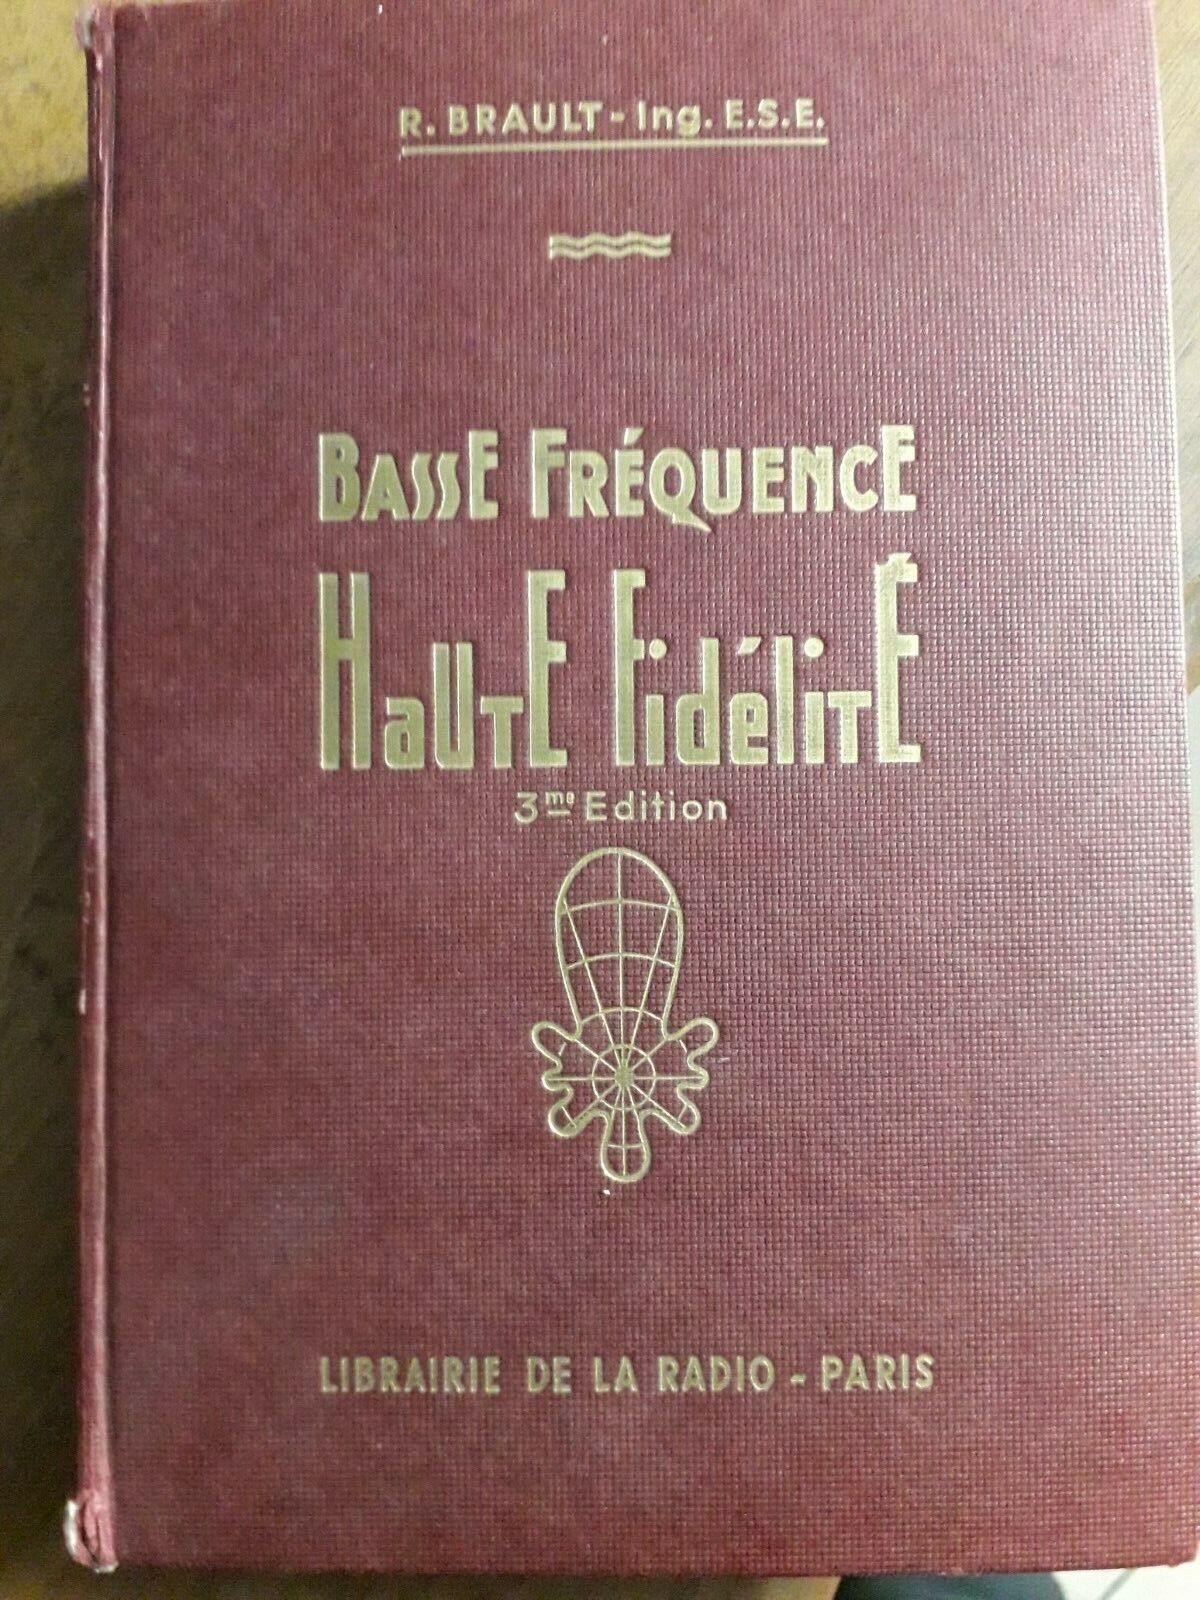 Rare Low Frequency High Fidelity, R.Brault 3rd Edition Radio Bookstore